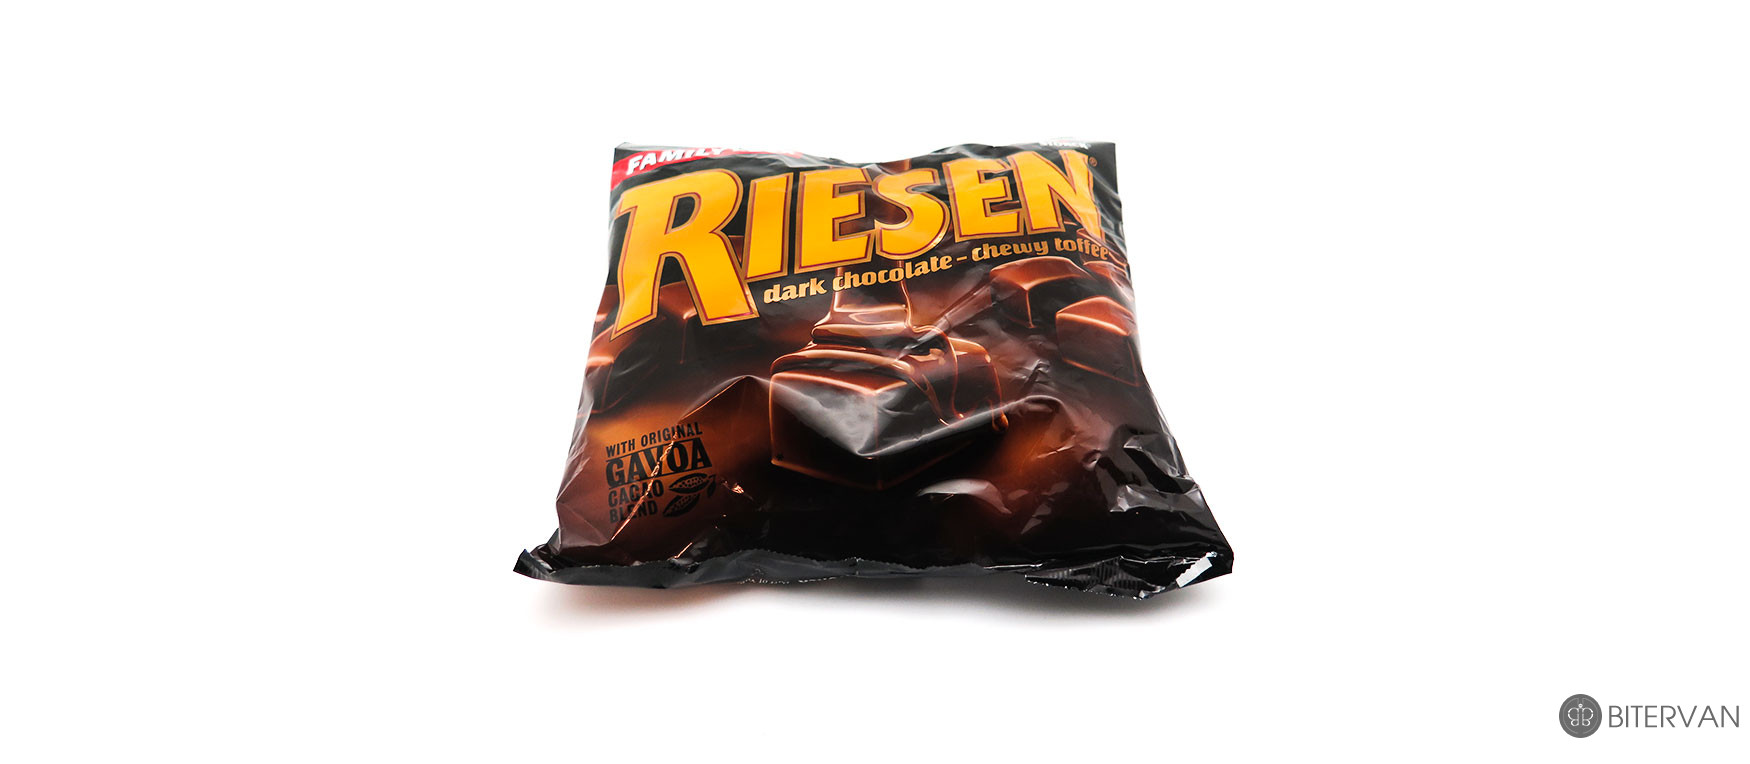 RIESEN dark chocolate- chewy toffee- with original GAVOA cacao blend- 400 gr